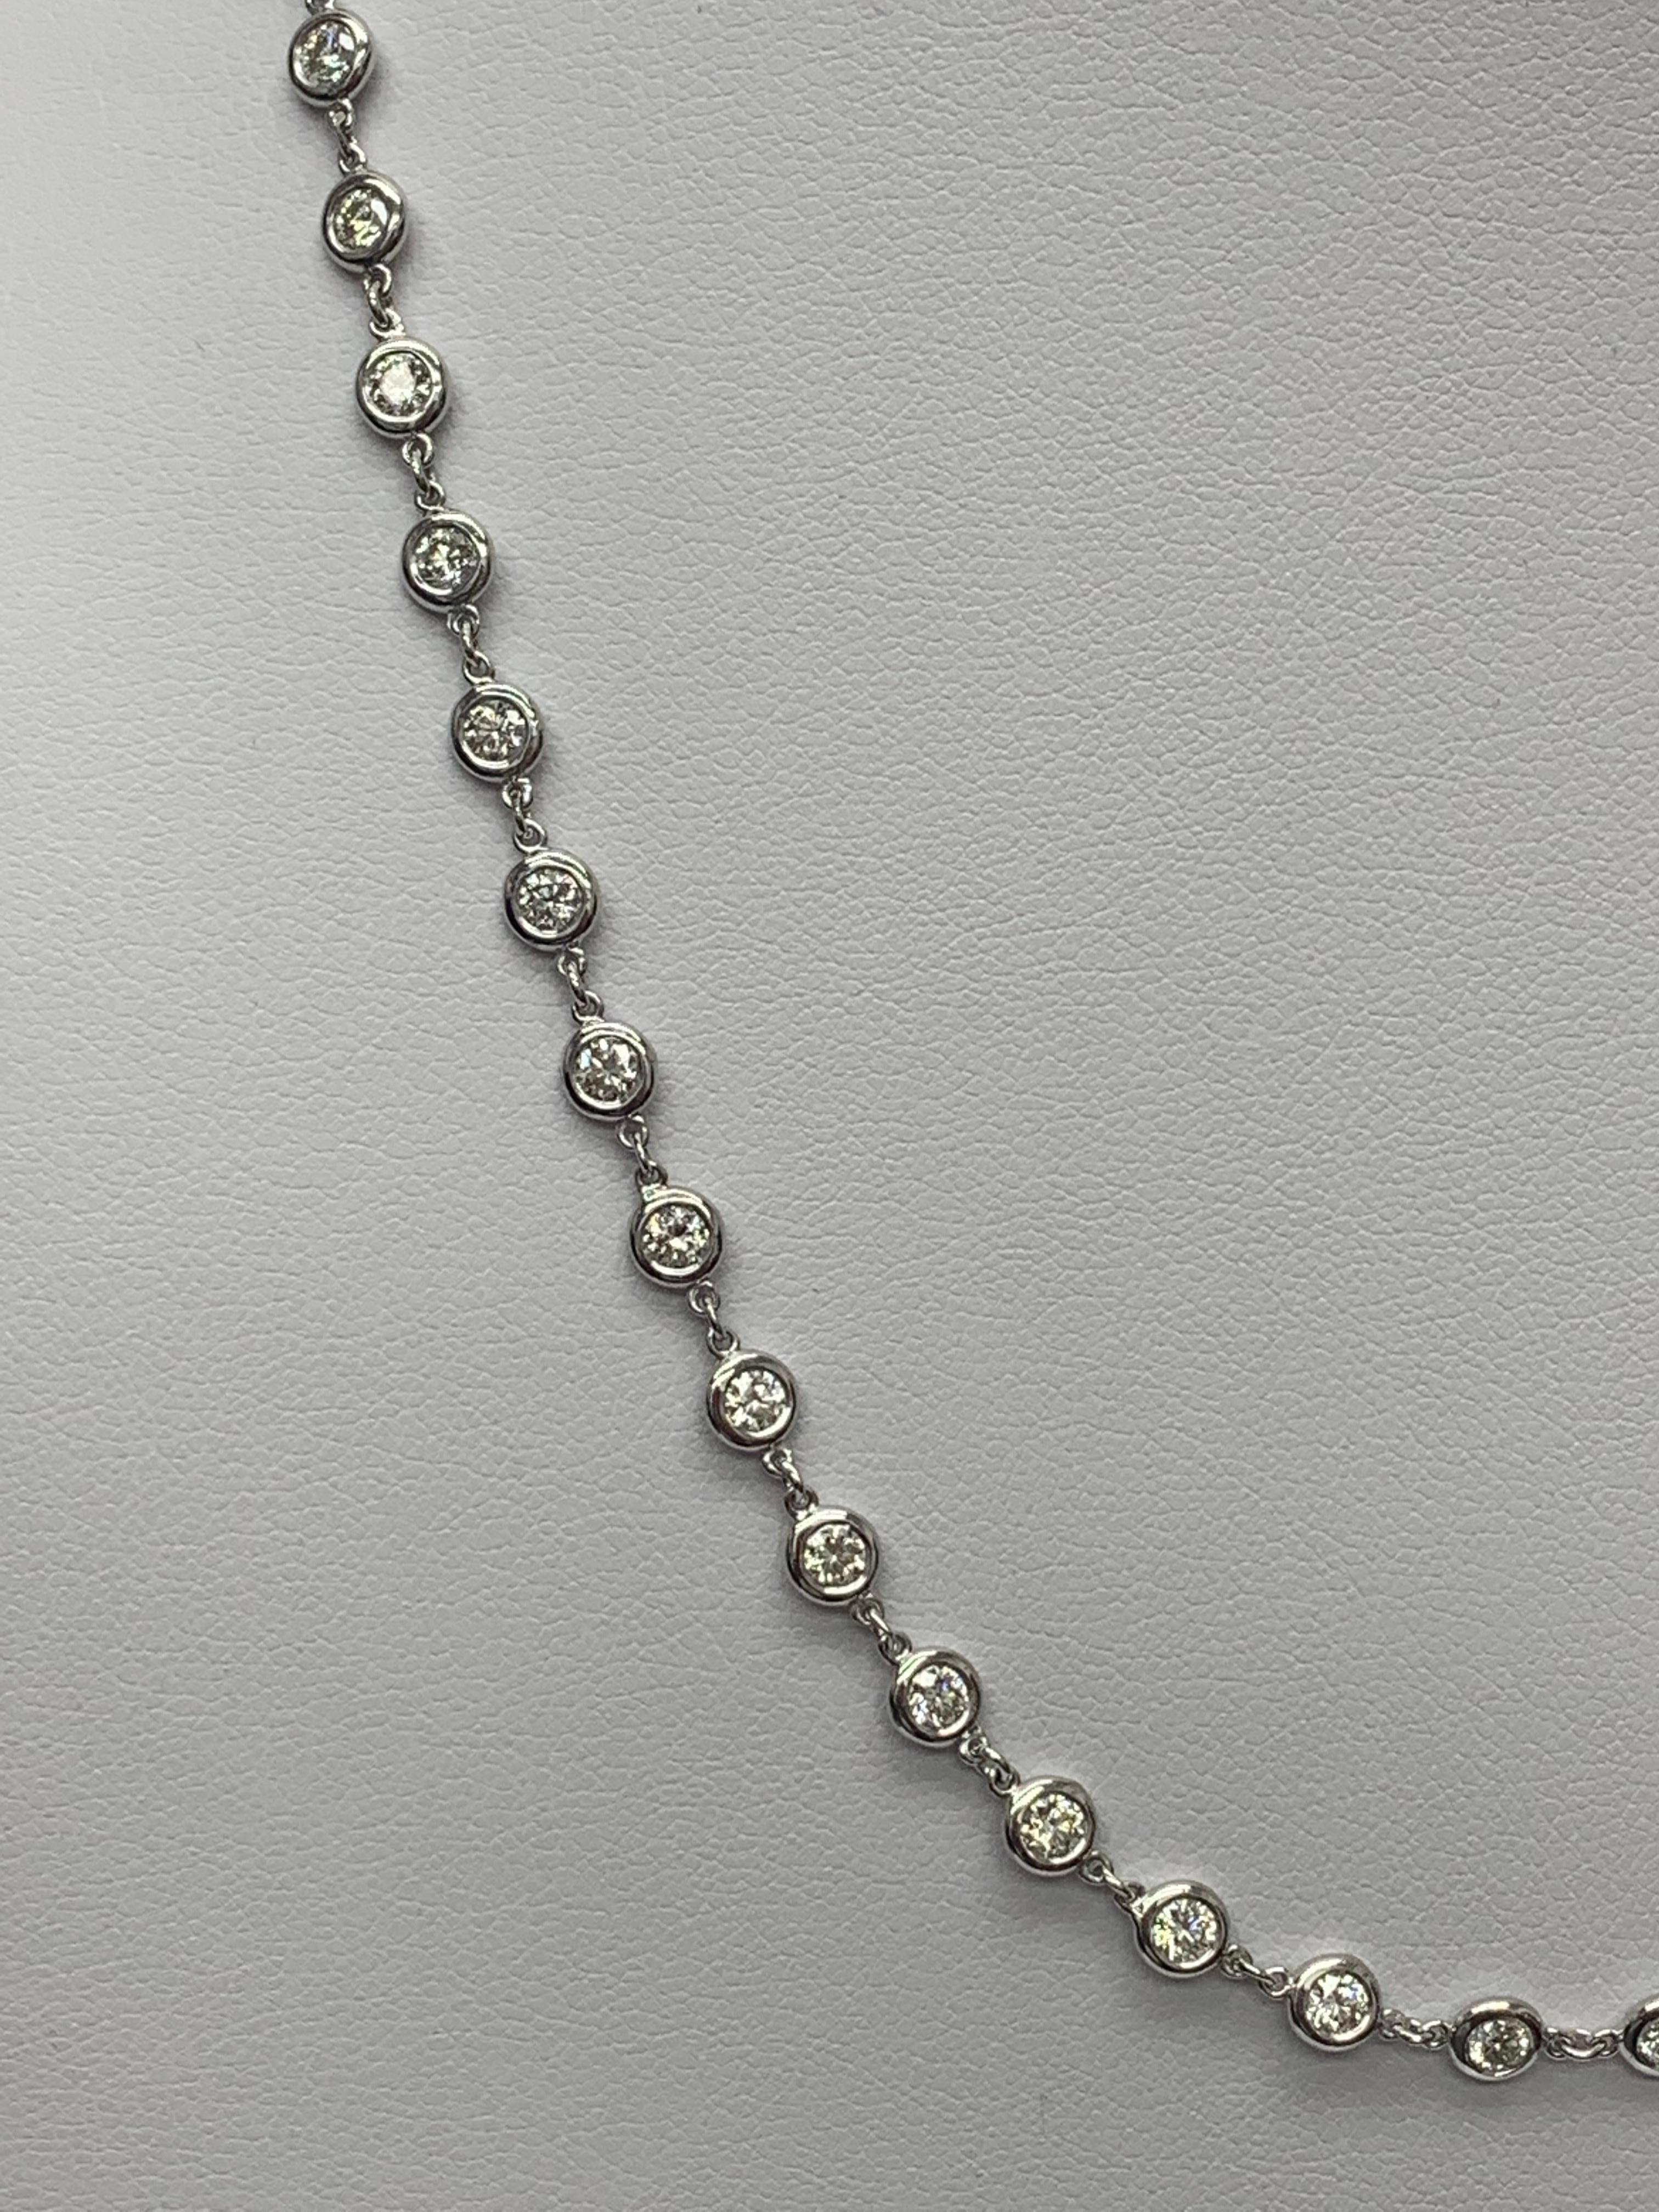 Modern 5.03 Carat Diamonds by the Yard Necklace in 14K White Gold For Sale